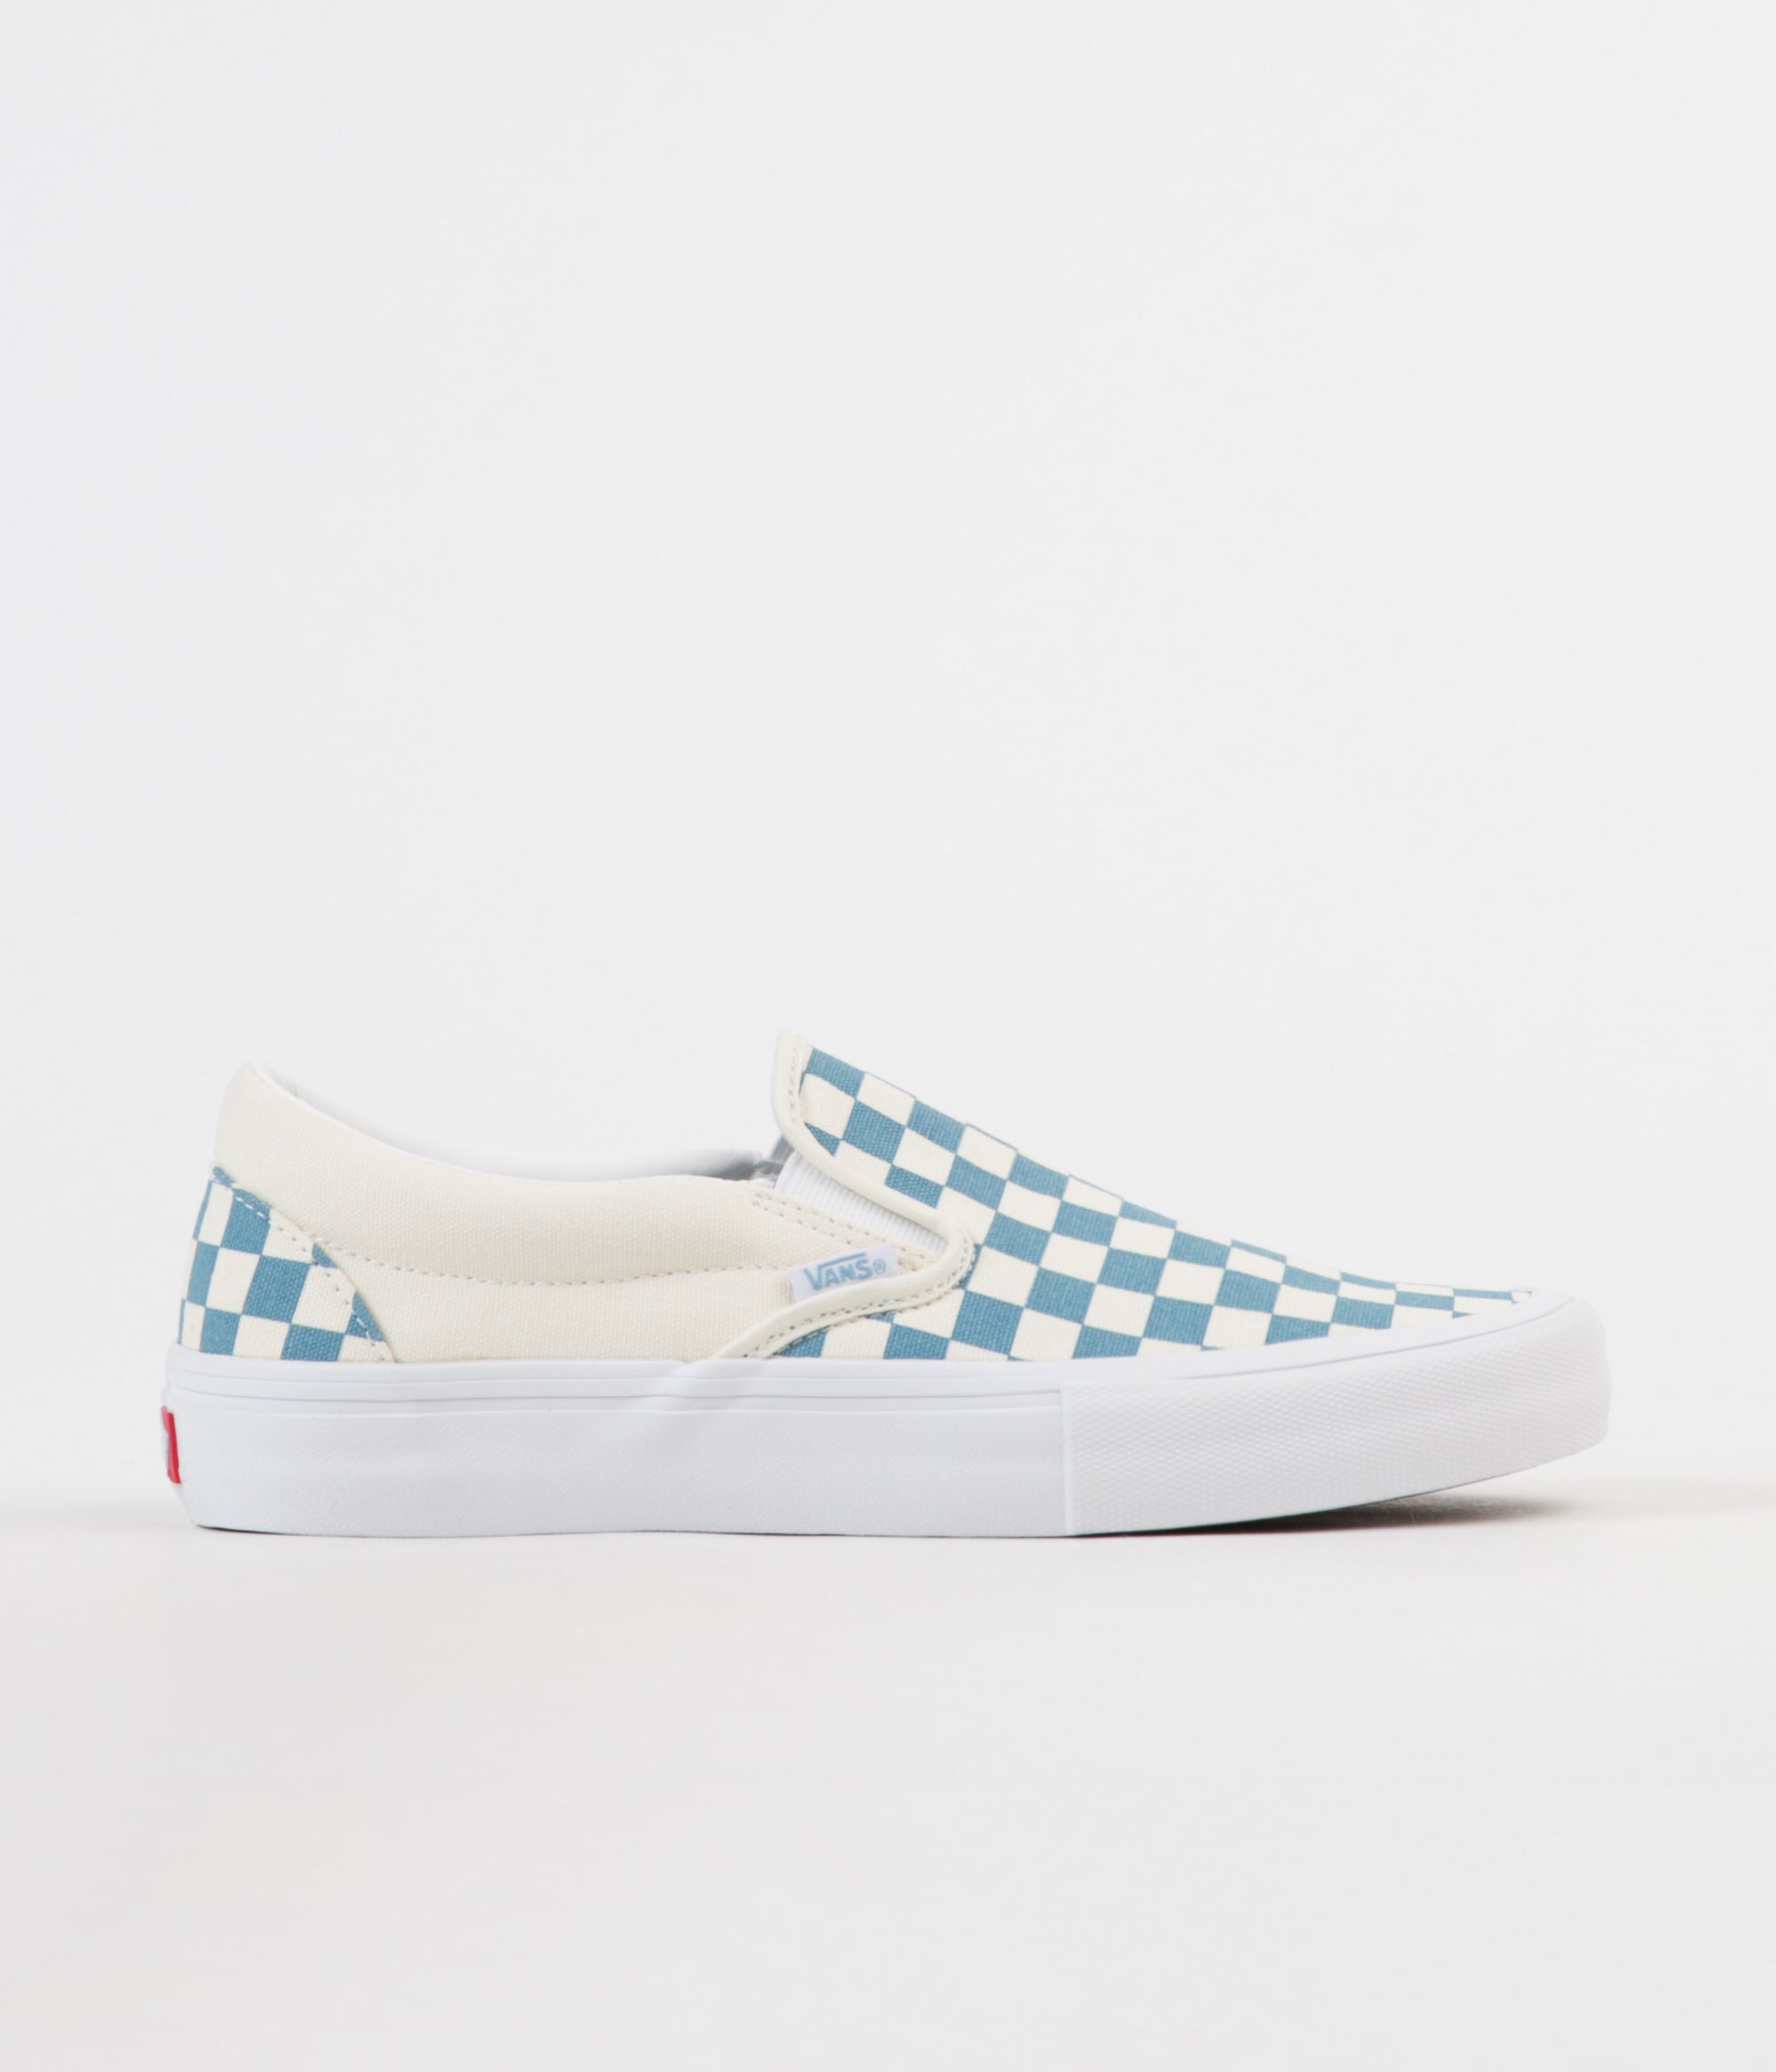 Vans Slip On Pro Checkerboard Shoes 